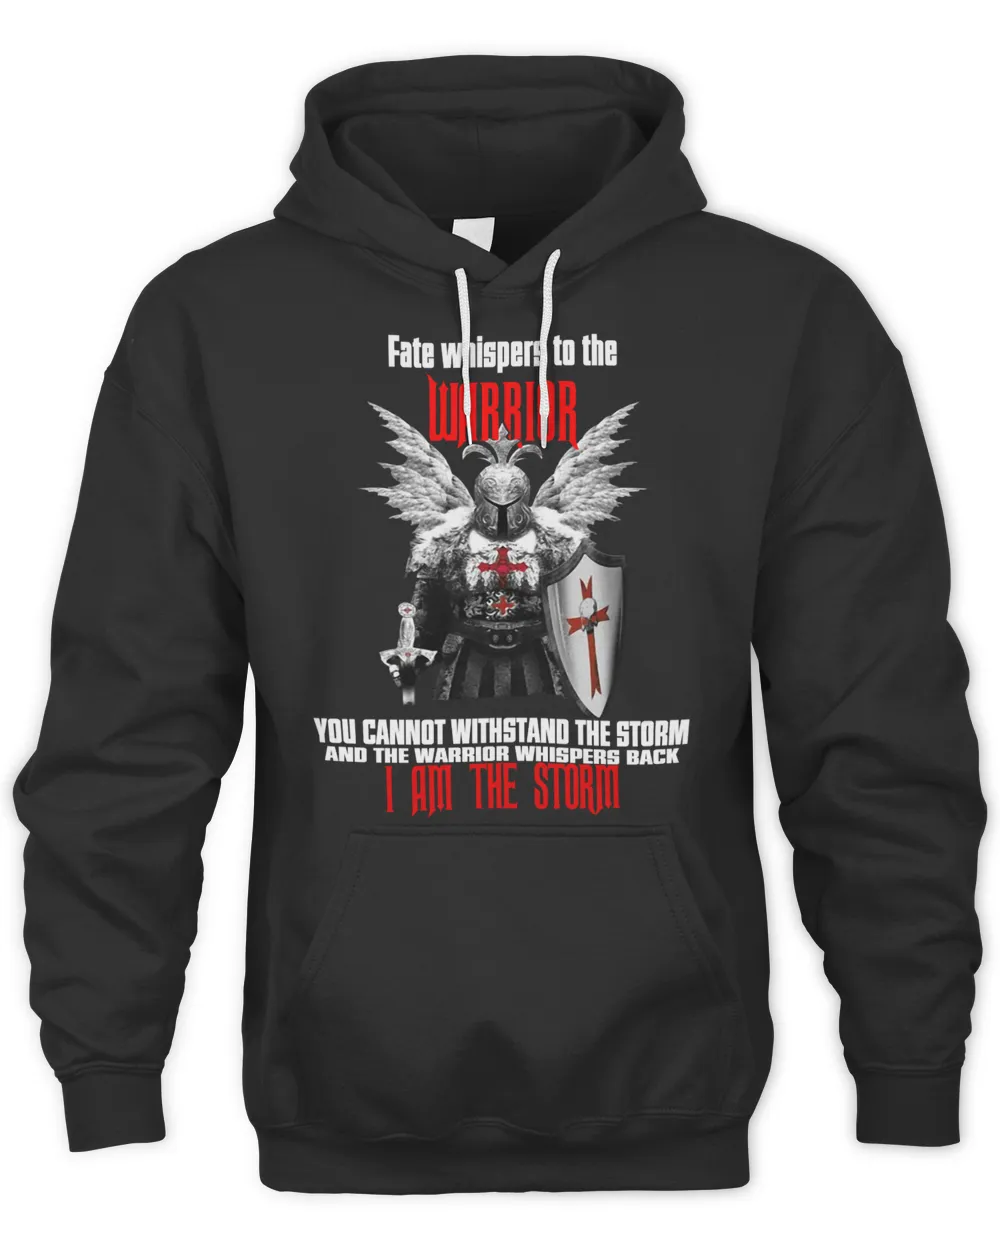 Knights Templar Hoodie - Fate Whispers To The Warrior You Cannot Withstand The Storm And The Warrior Whispers Back I Am The Storm - Knights Templar Store